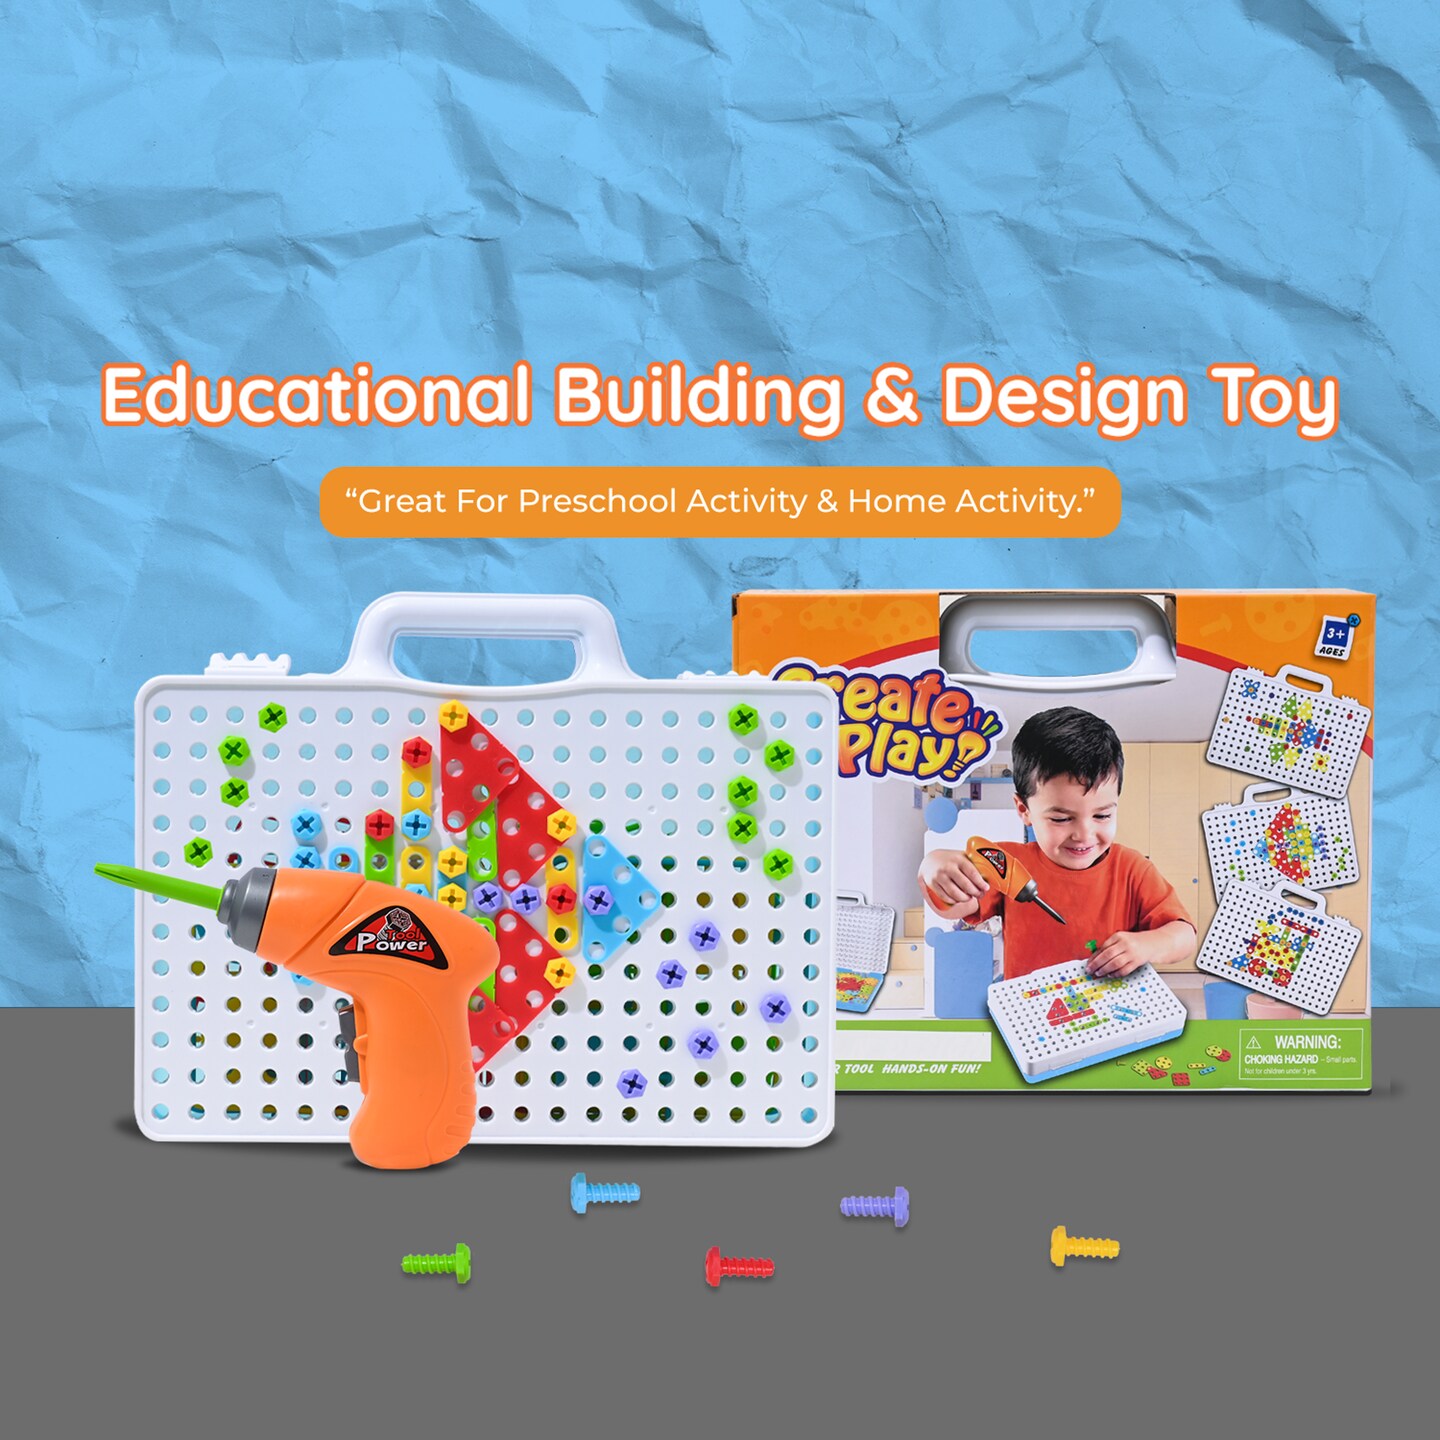 Drill &#x26; Play Creative Educational Toy with Real Toy Drill - Mosaic Design Building Toys Tool Kit